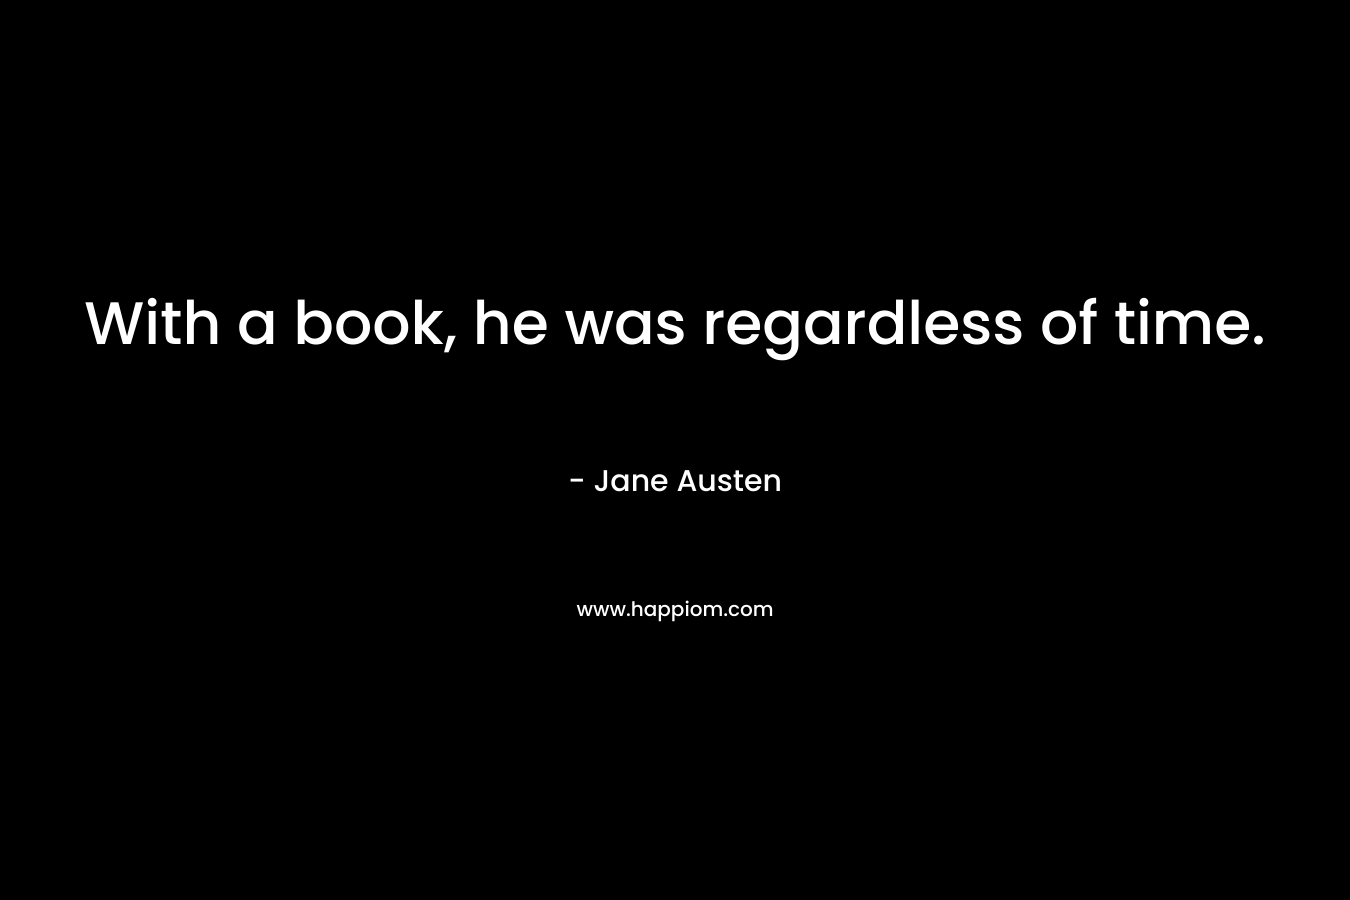 With a book, he was regardless of time. – Jane Austen